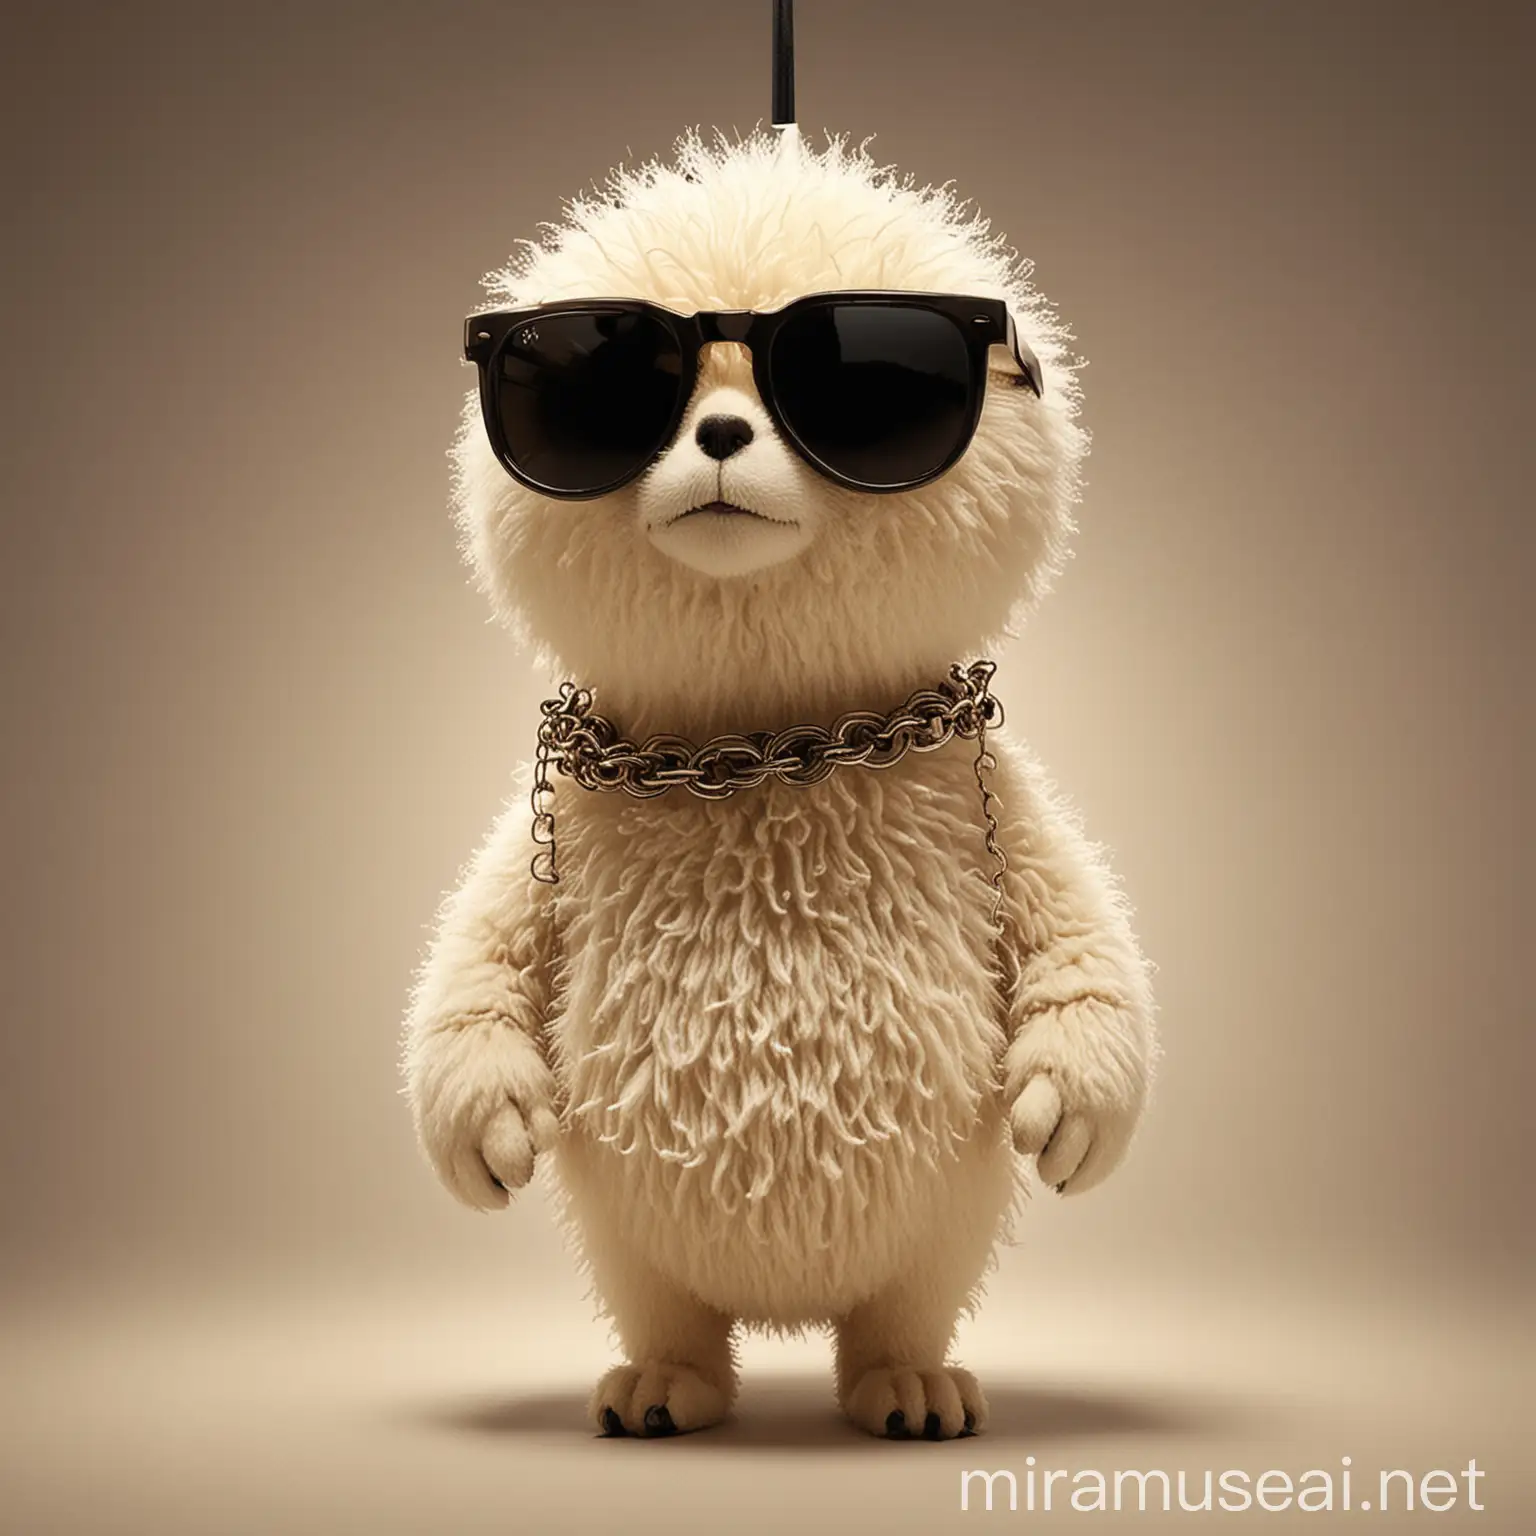 Can you generate a cuddly fuzzy lightbulb (with sunglasses) named ET that has a chain with error on it